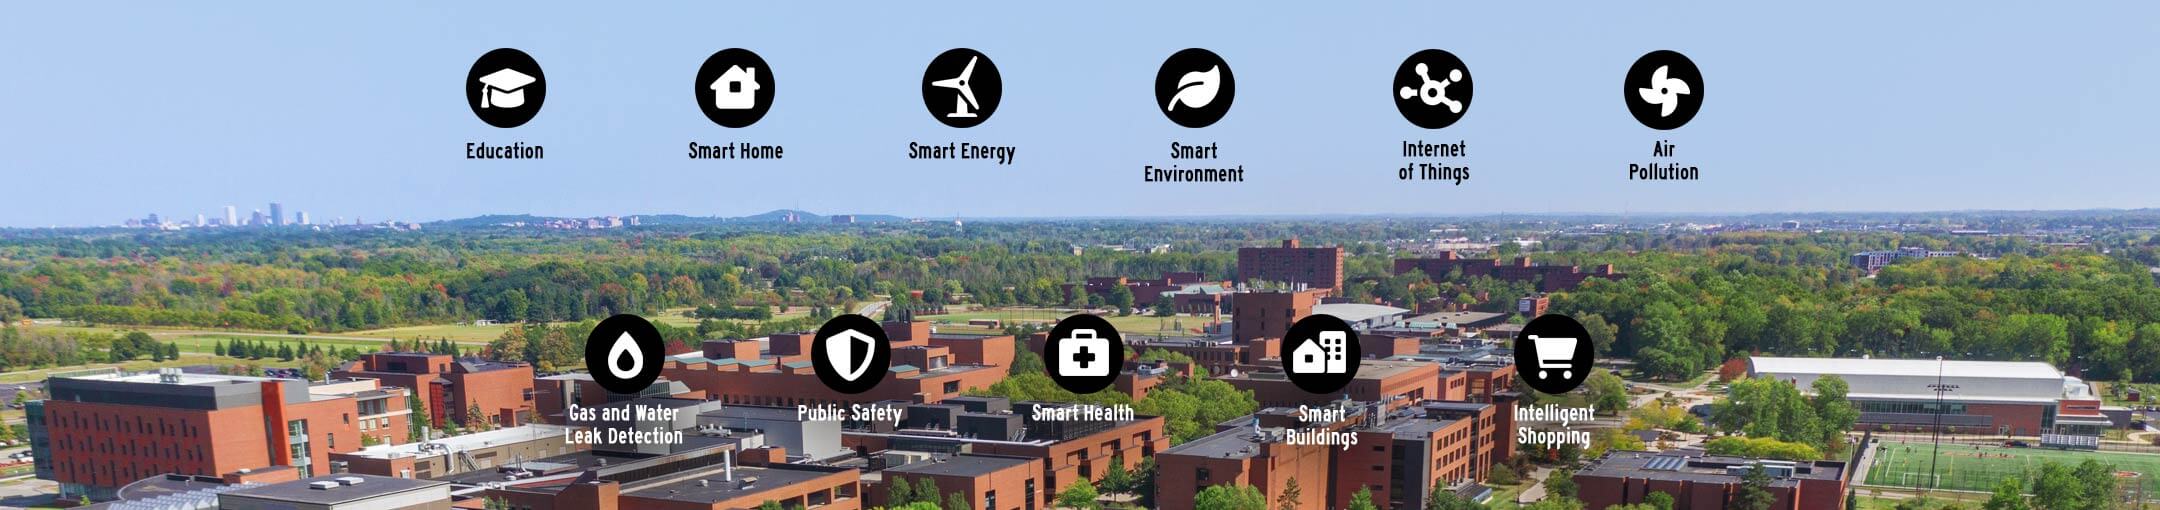 Various sustainable tech icons and labels on a background of an aerial photo of RIT campus.